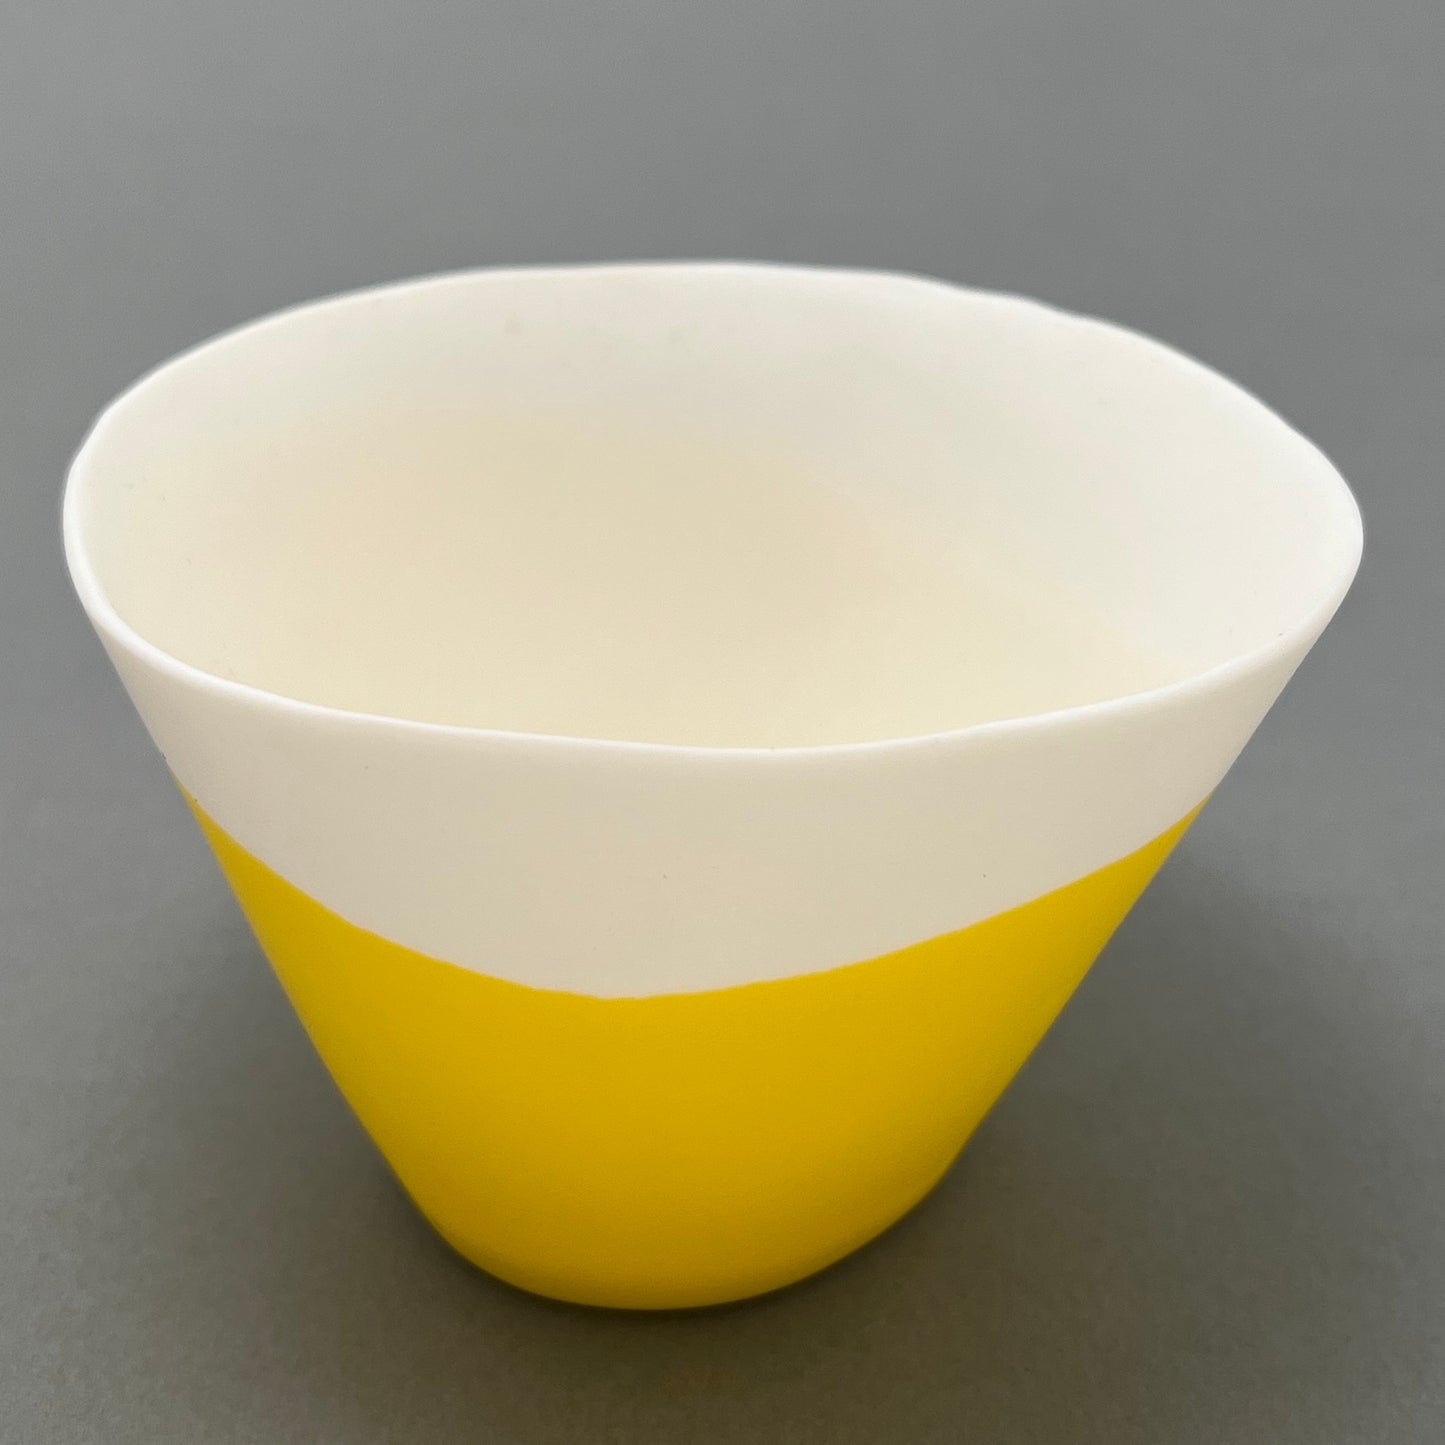 A white and yellow coloured porcelain bowl standing on a gray background 